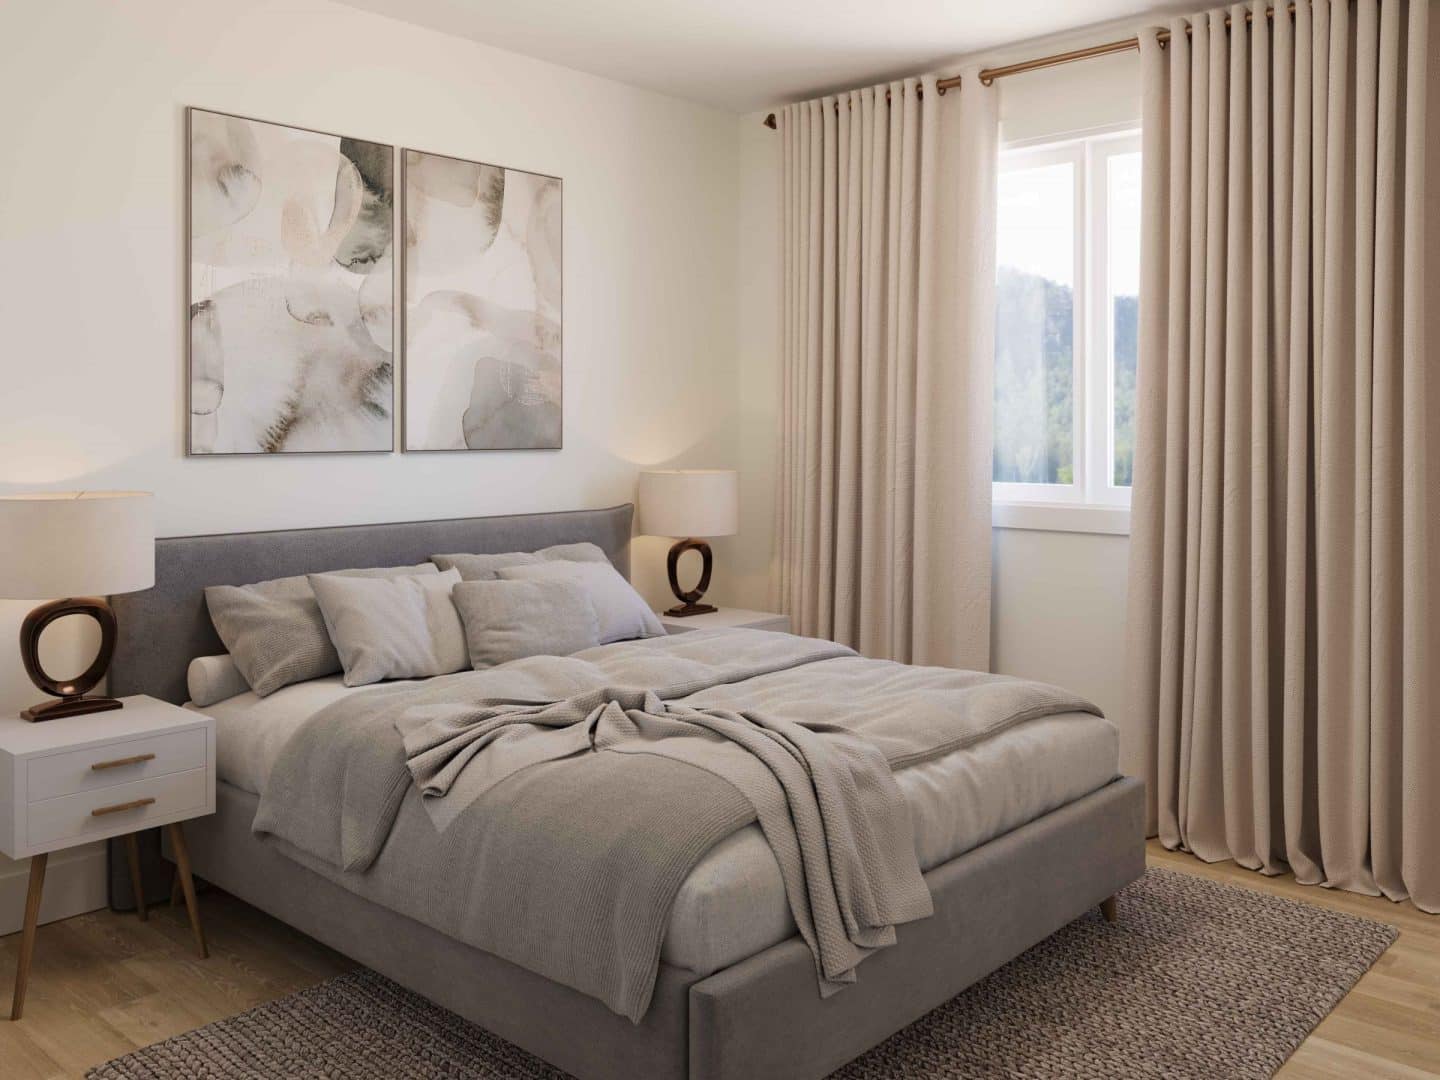 Model Lupin, a single-storey home in the classic style. View of the secondary bedroom.